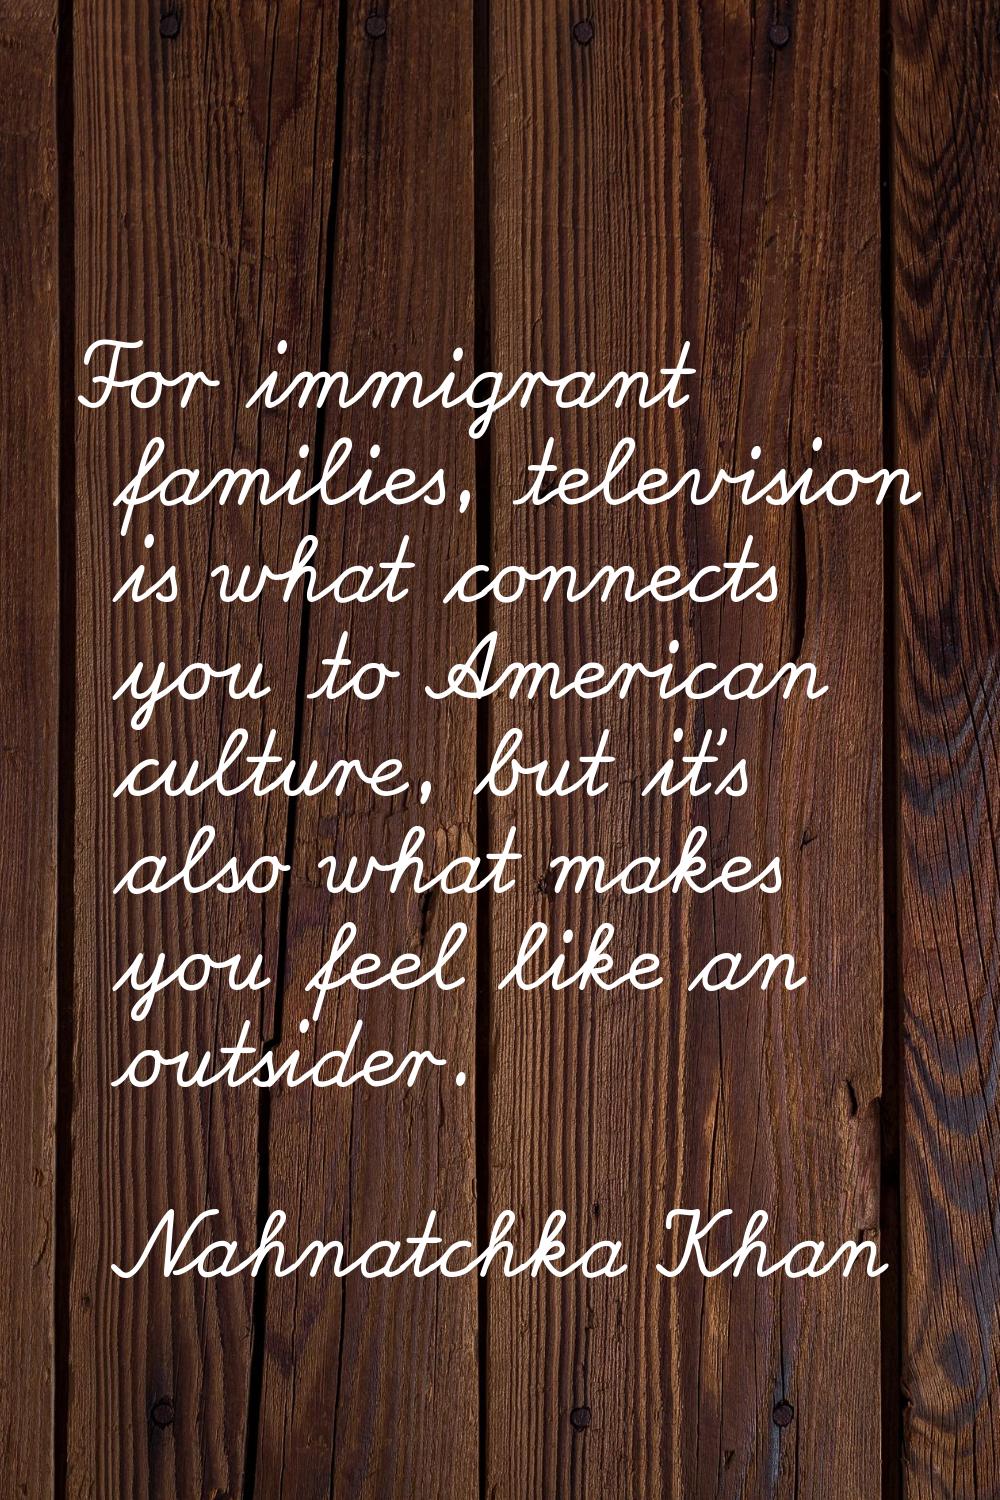 For immigrant families, television is what connects you to American culture, but it's also what mak